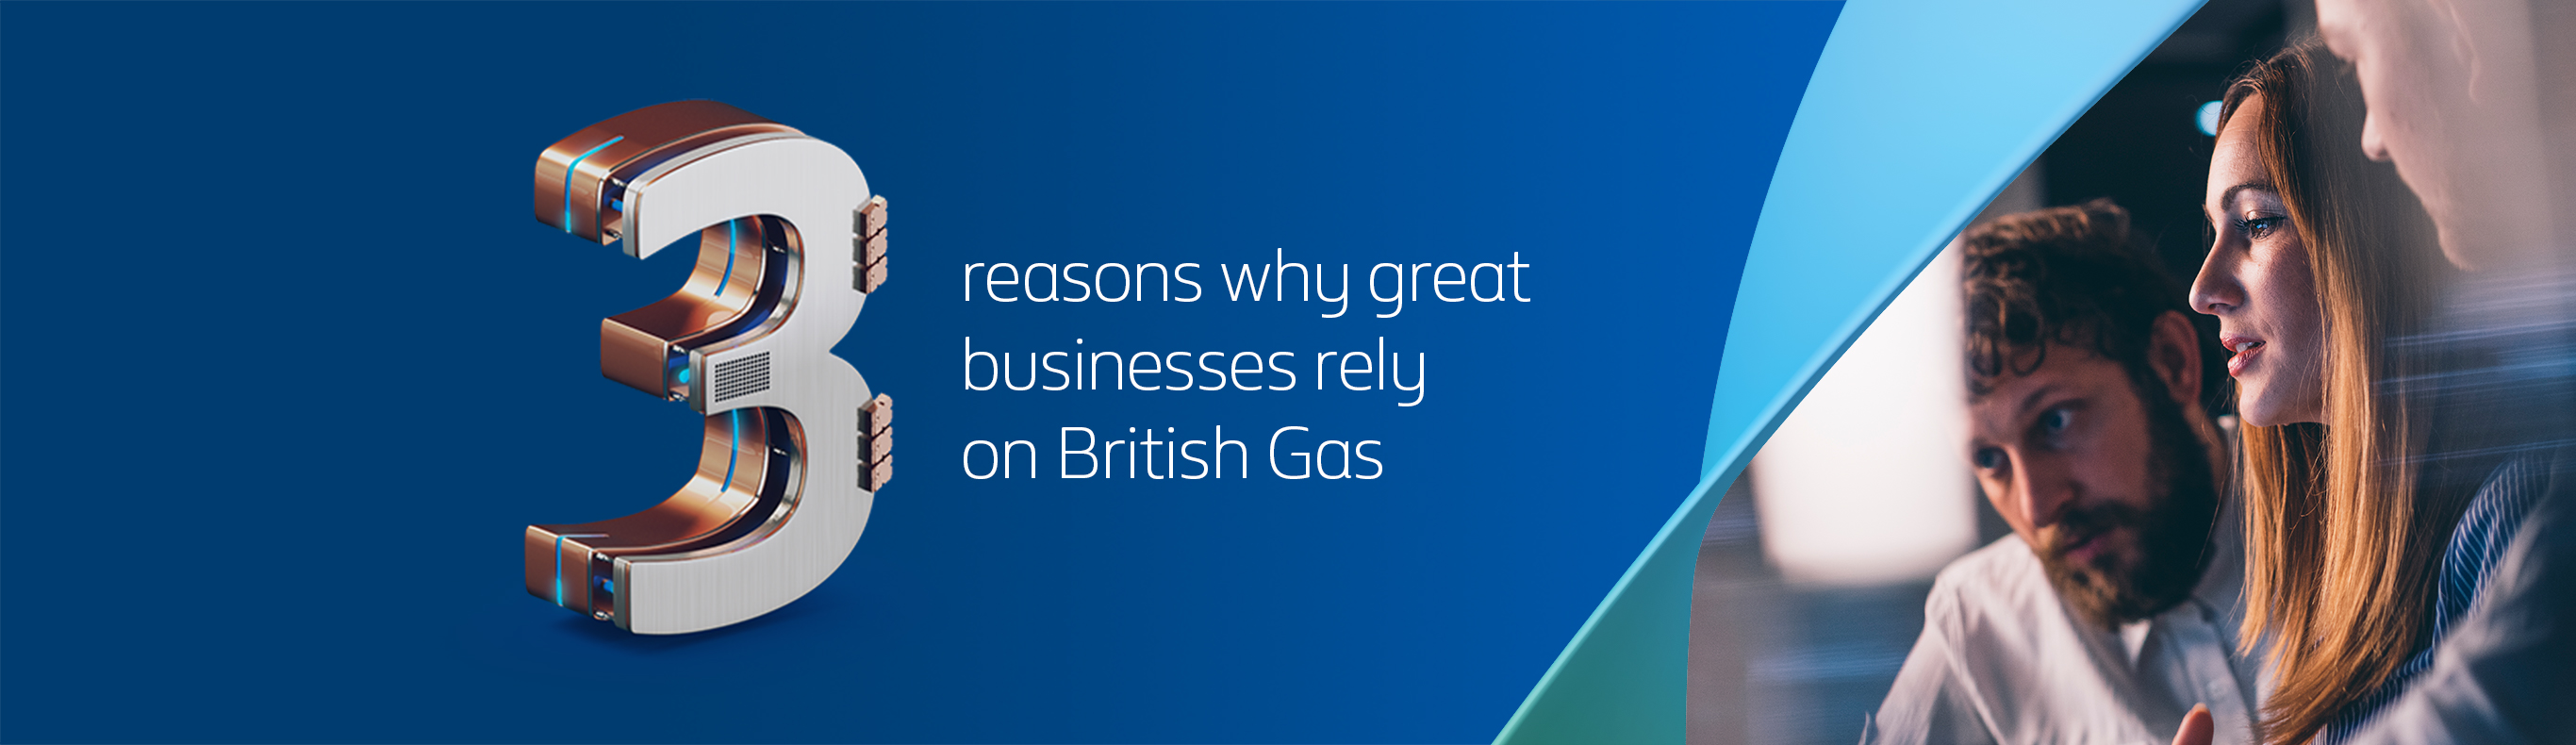 3 reasons why great businesses rely on British Gas